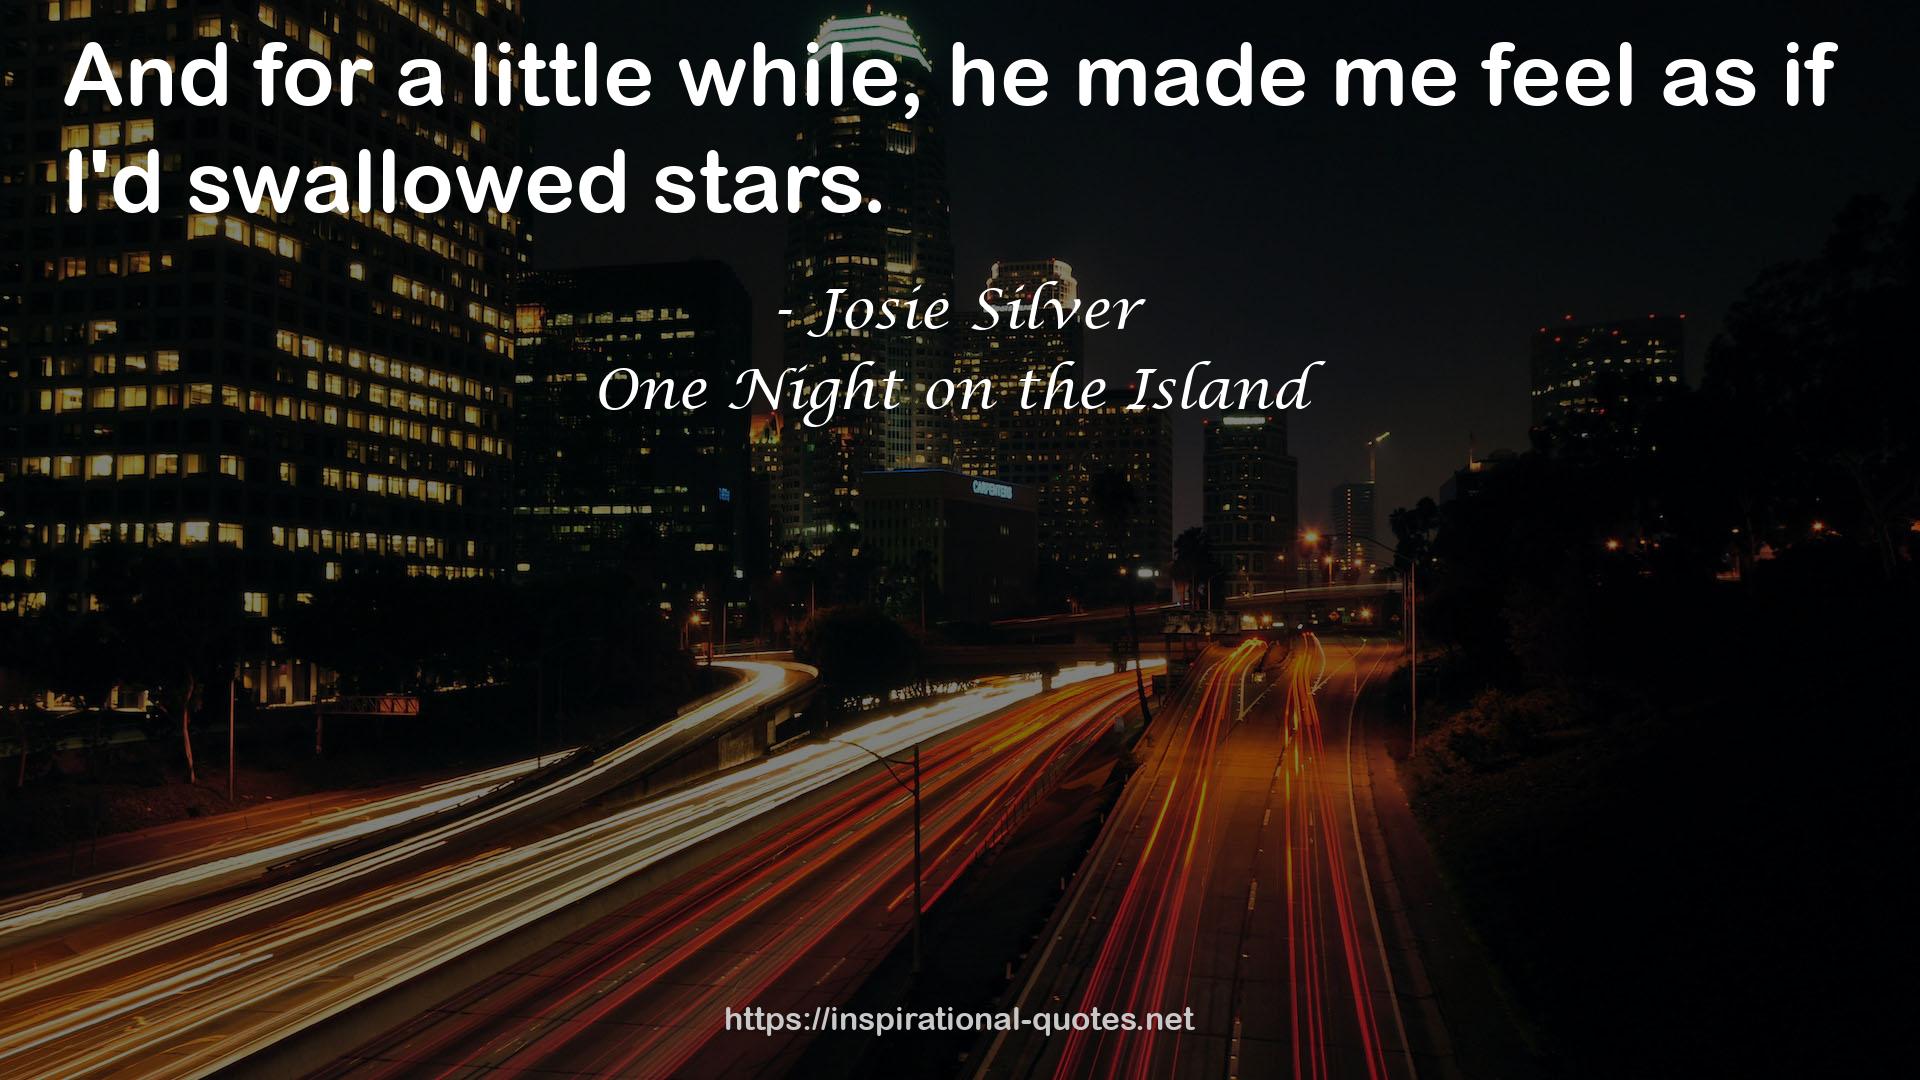 One Night on the Island QUOTES